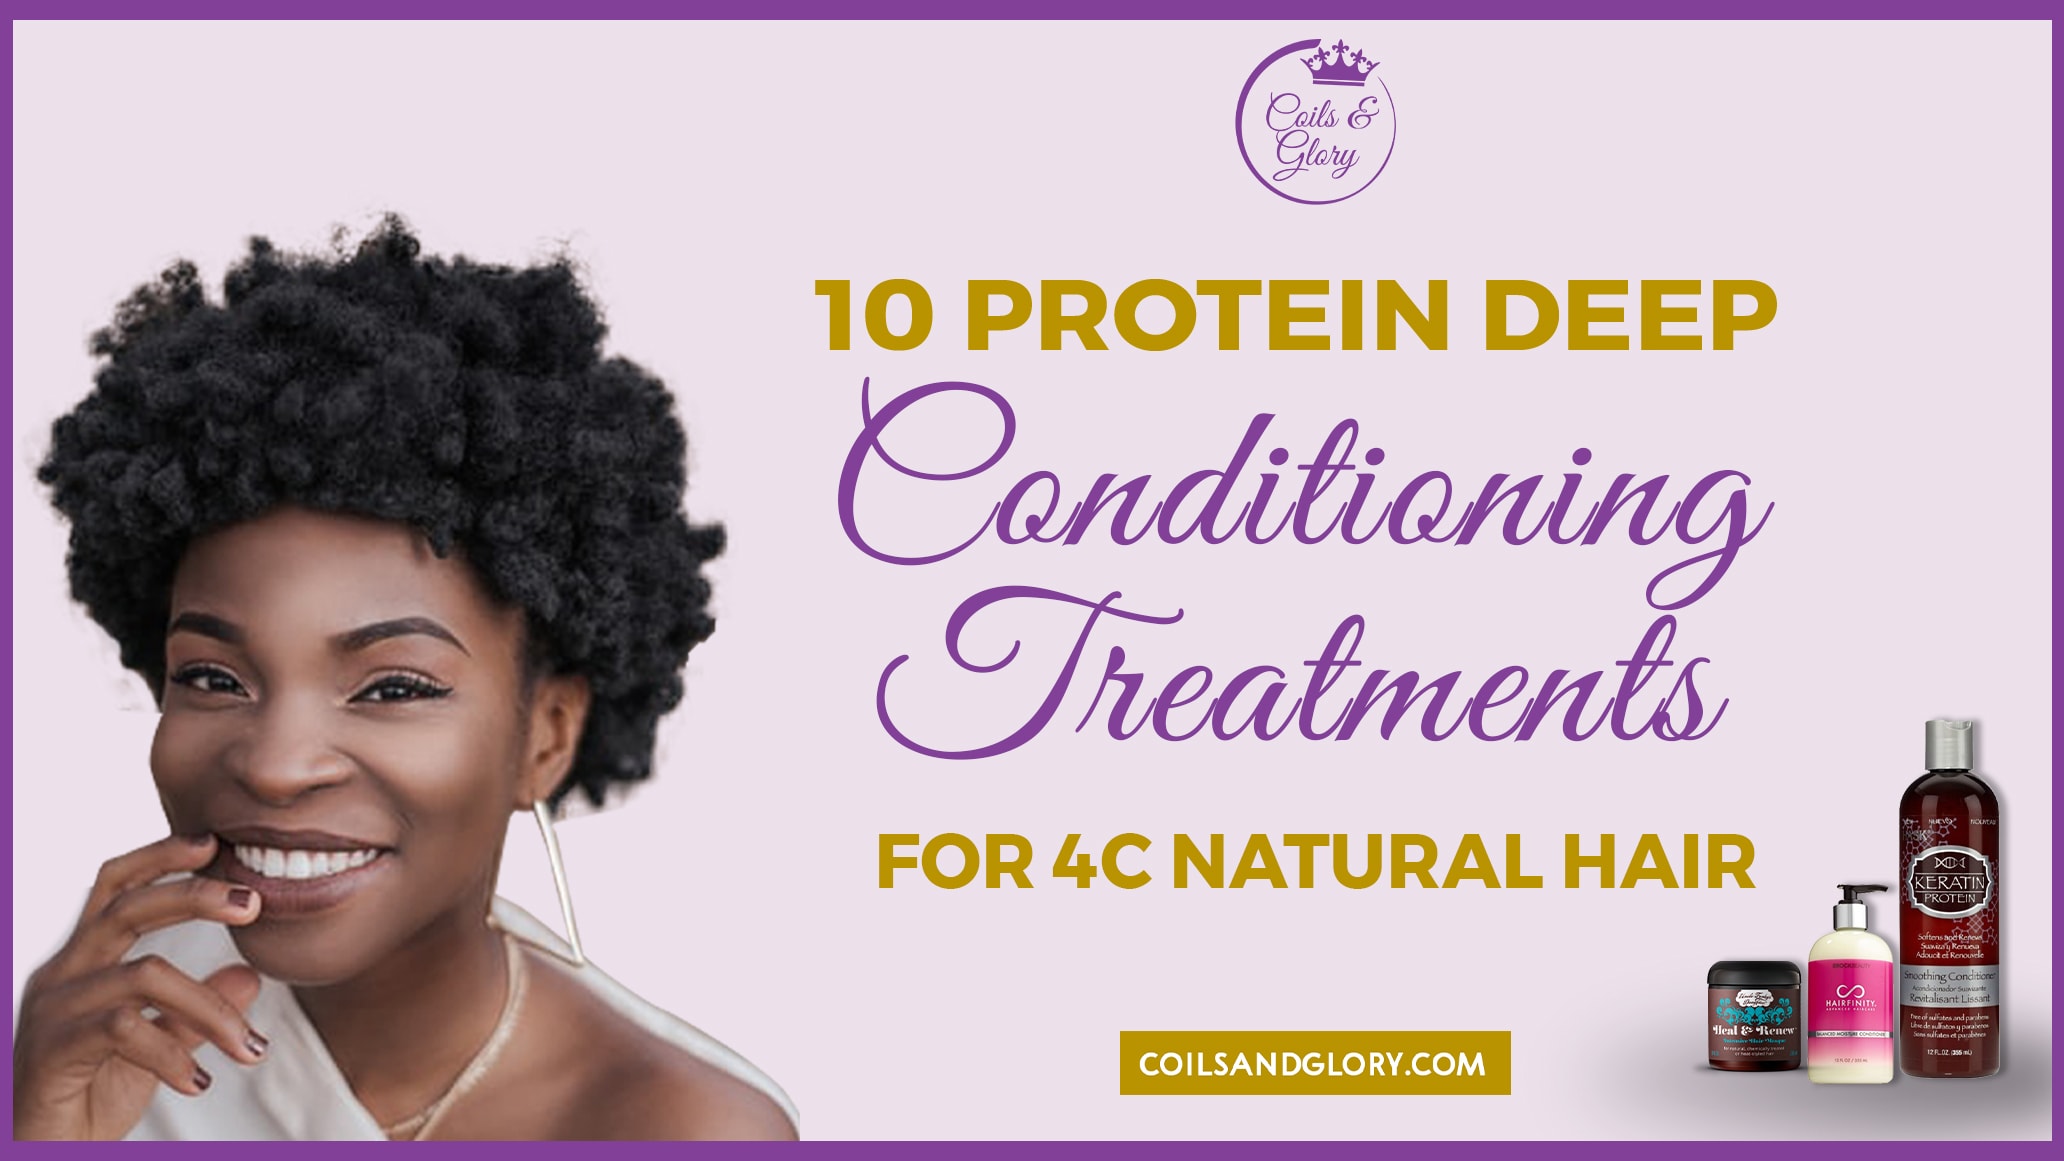 How To & Best Protein Treatment for Natural Hair! + Transformation Pics |  ApHogee - YouTube